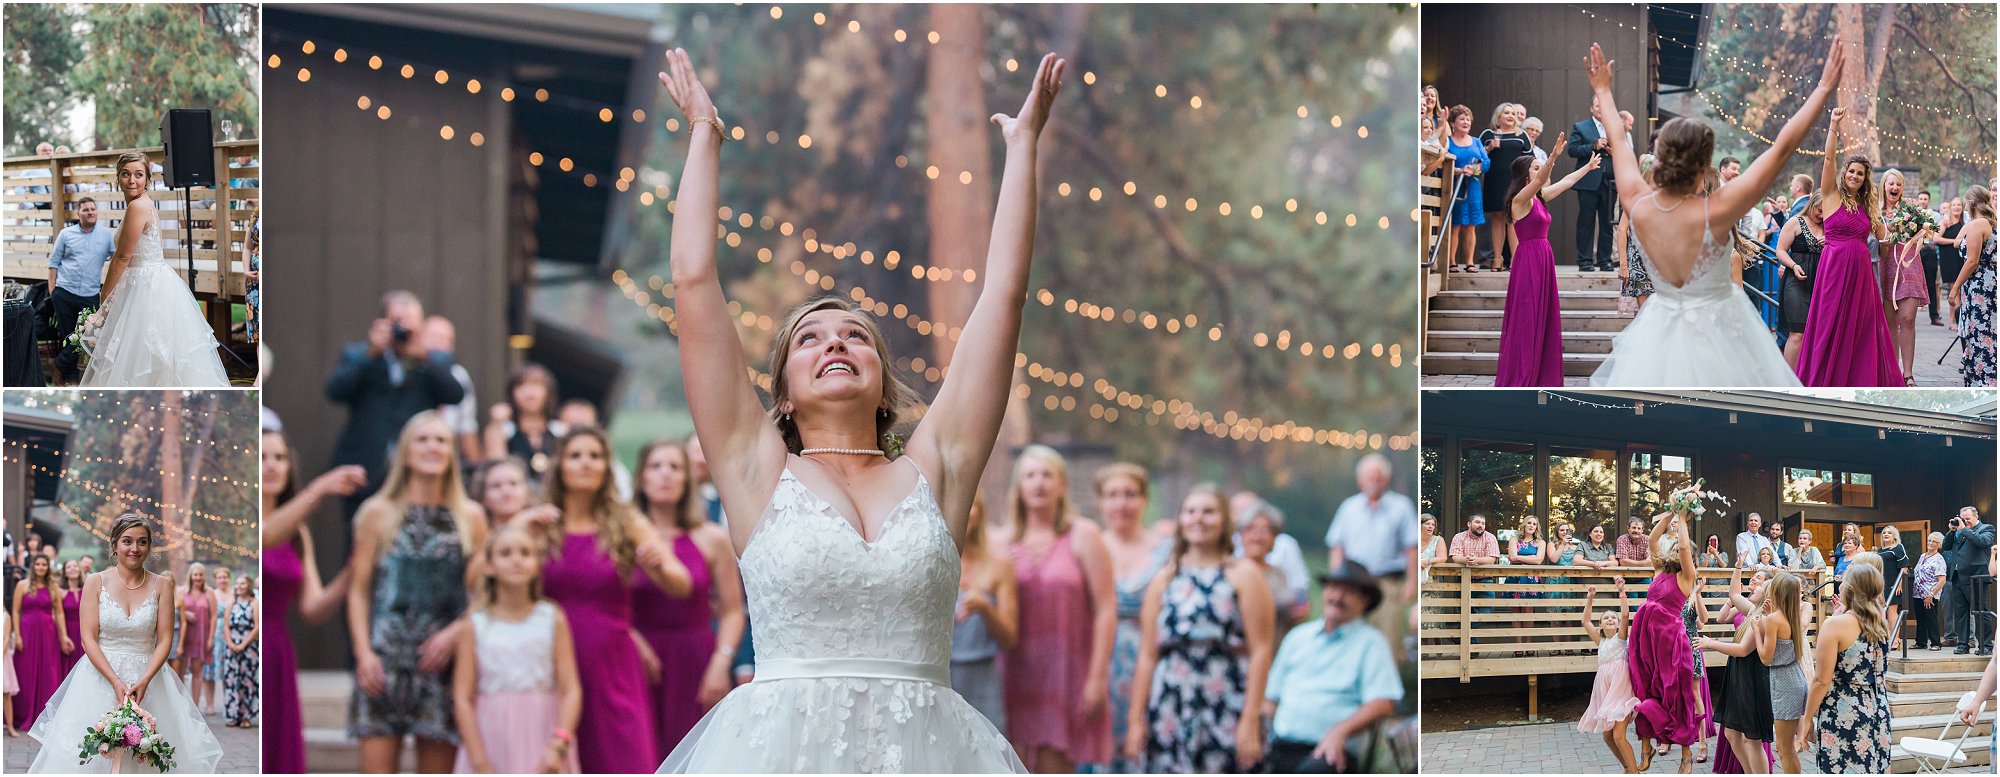 The bride really tosses the bouquet with the beautiful string lights behind her outside of the Rock Springs Ranch wedding venue in Bend, OR. | Erica Swantek Photography